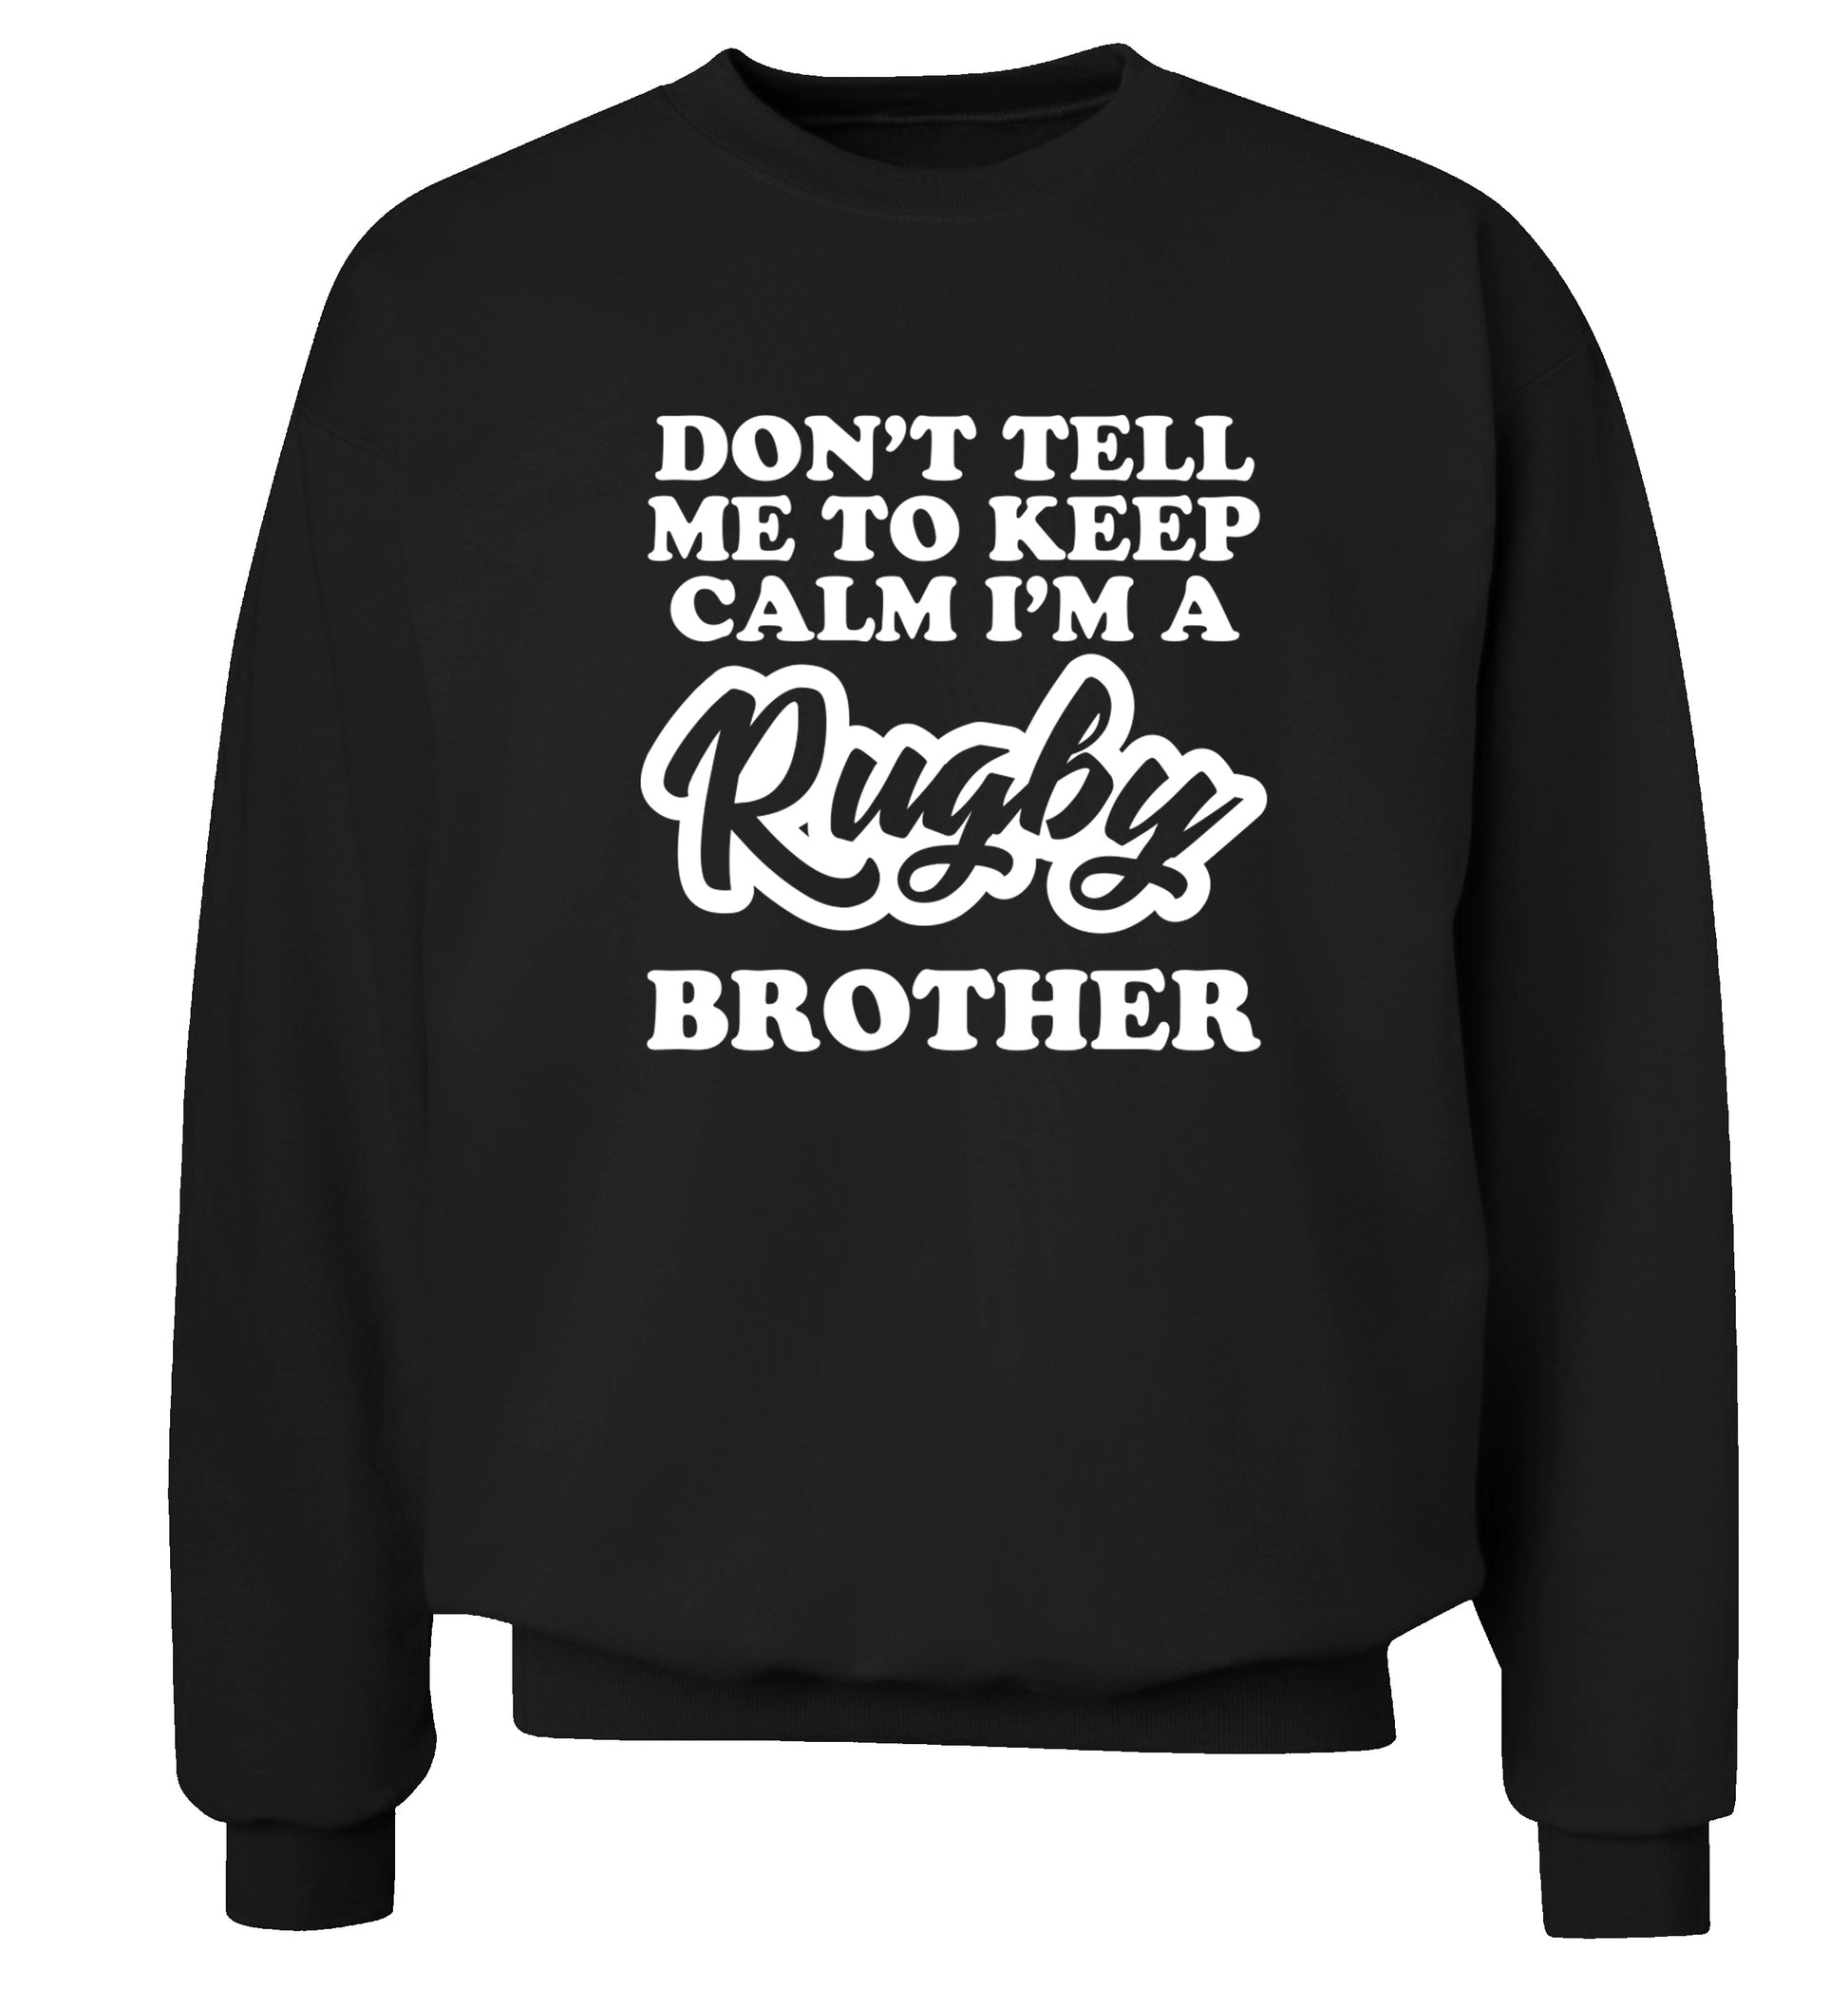 Don't tell me keep calm I'm a rugby brother Adult's unisex black Sweater 2XL